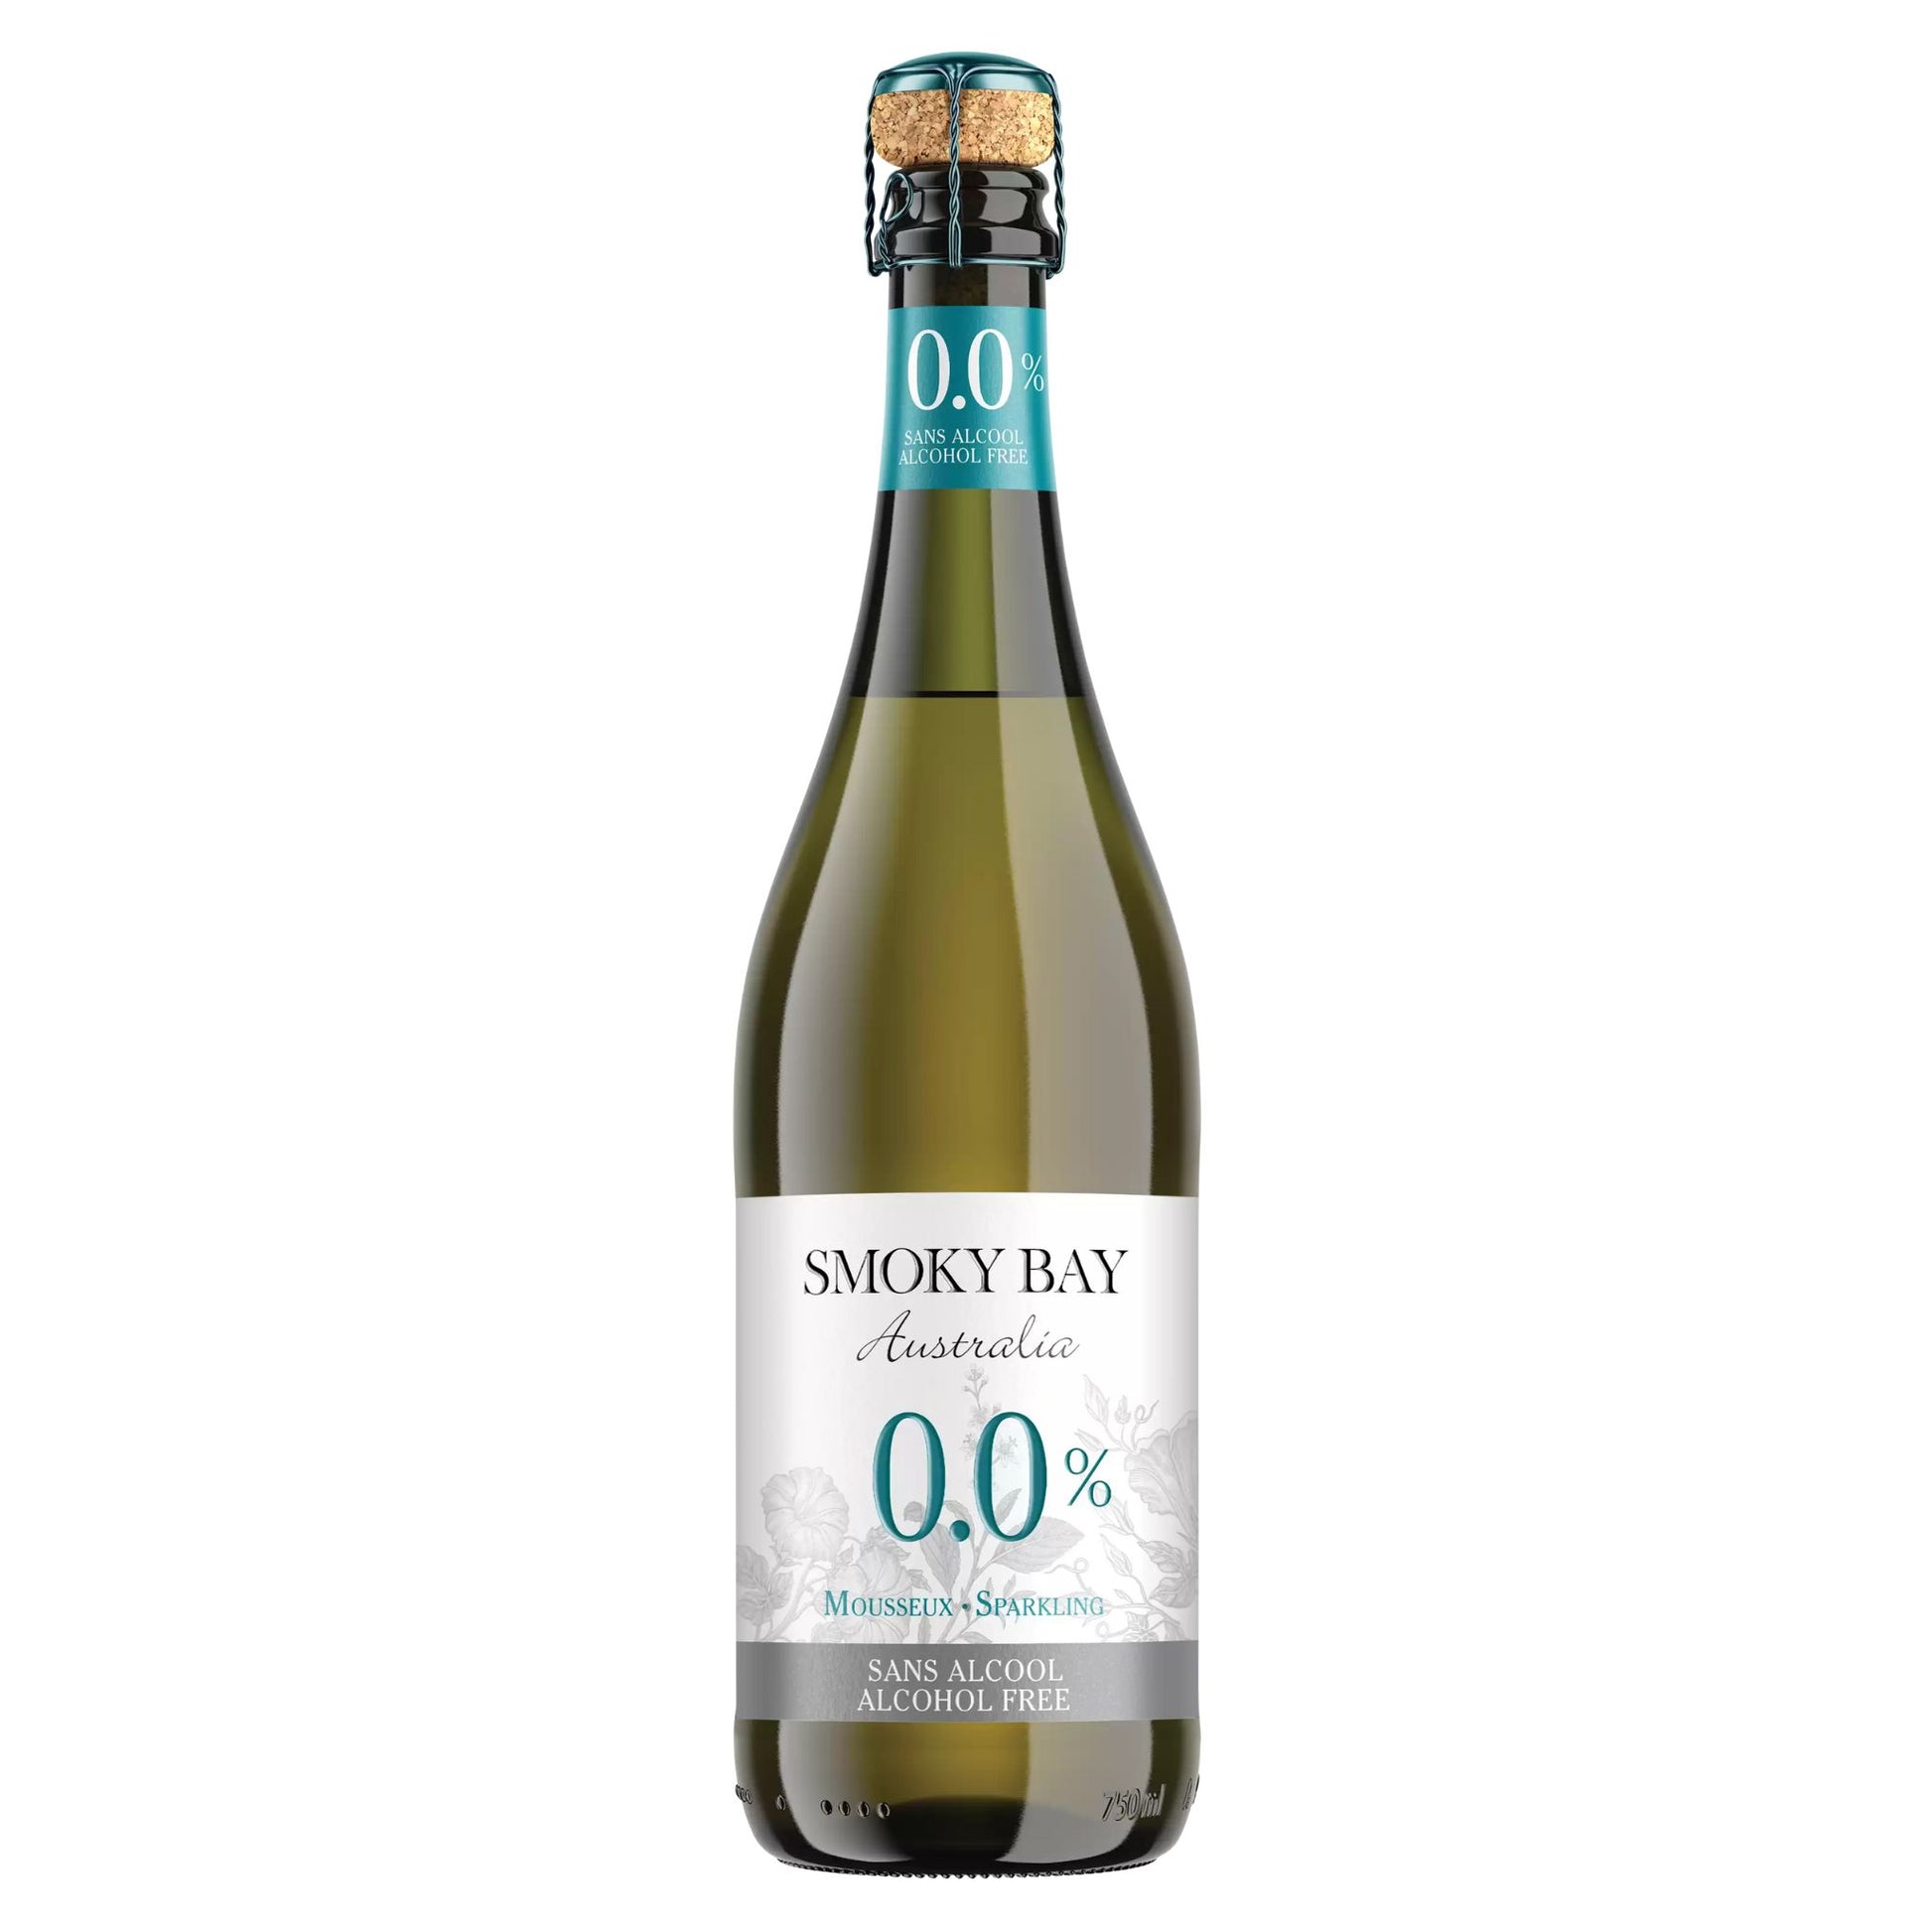 Smoky Bay Non-Alcoholic Sparkling White is available at Knyota Non-Alcoholic Drinks.